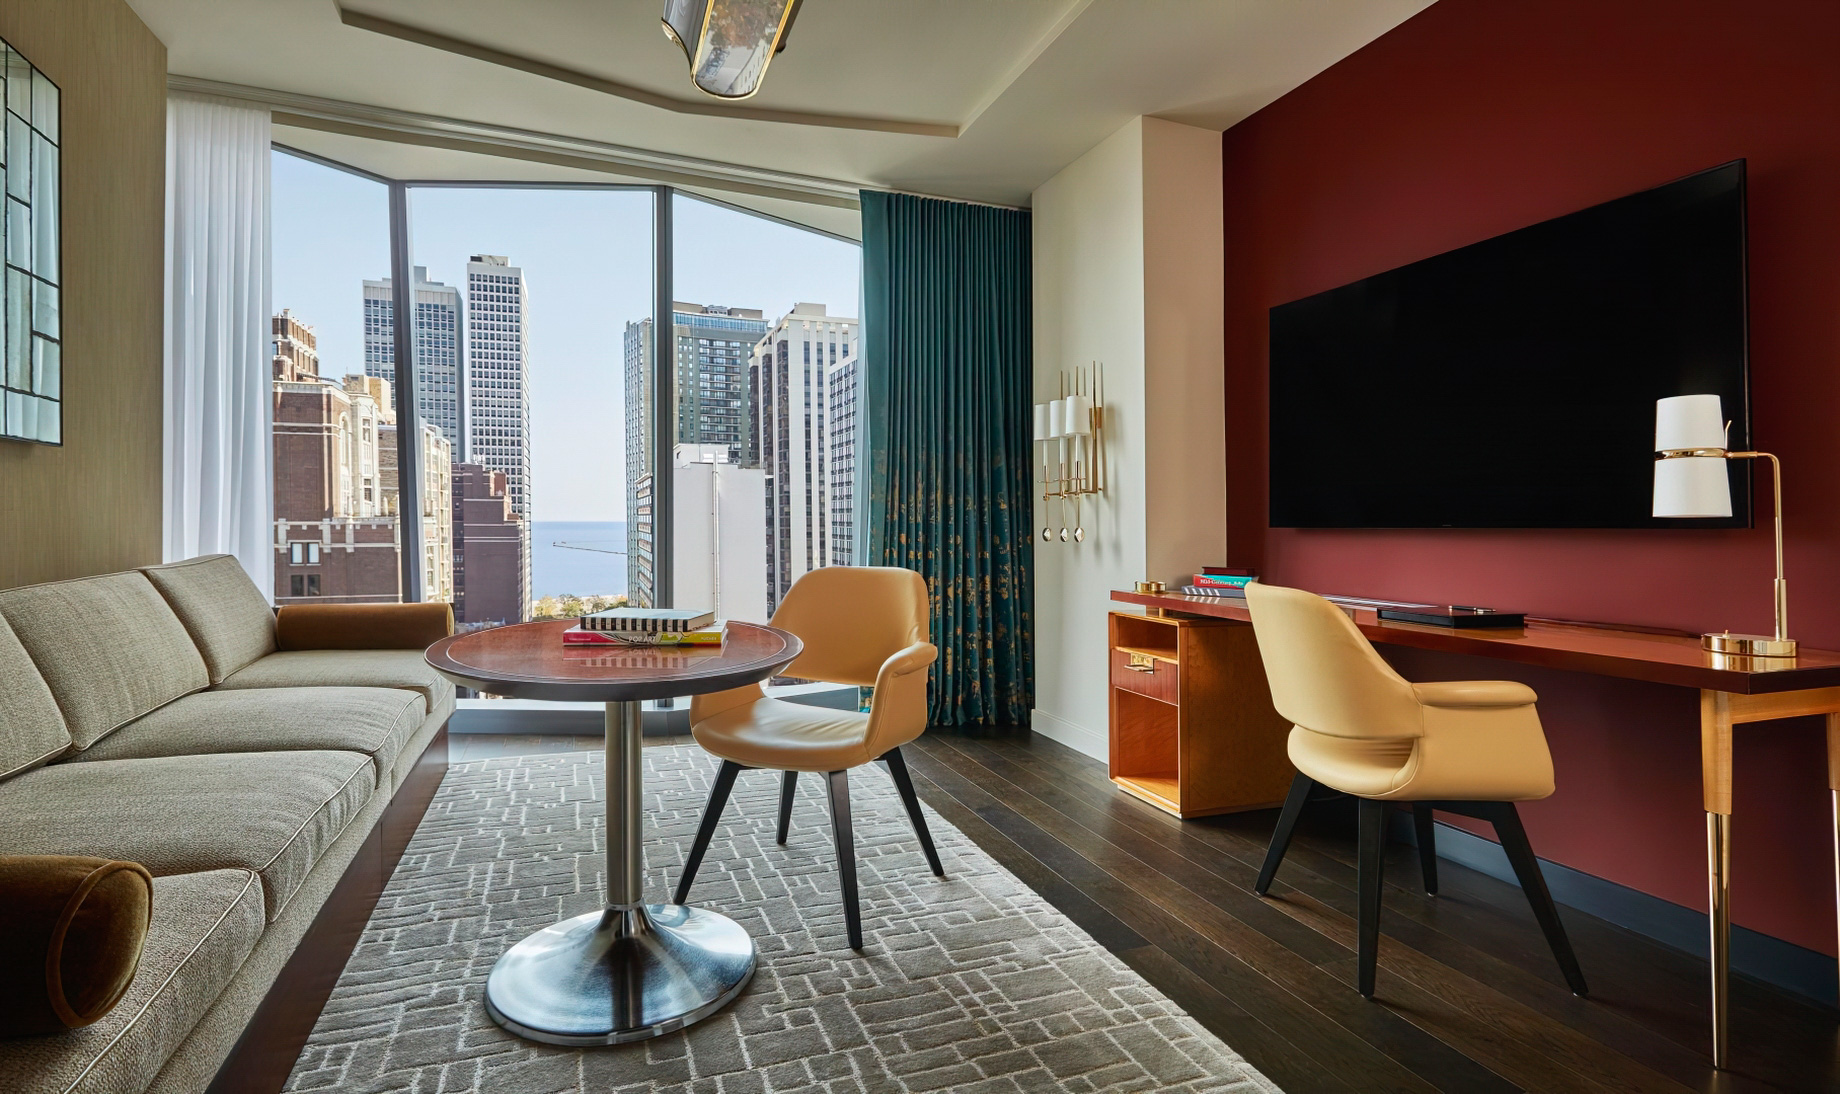 Viceroy Chicago Hotel – Chicago, IL, USA – One Bedroom Lake View Suite Interior